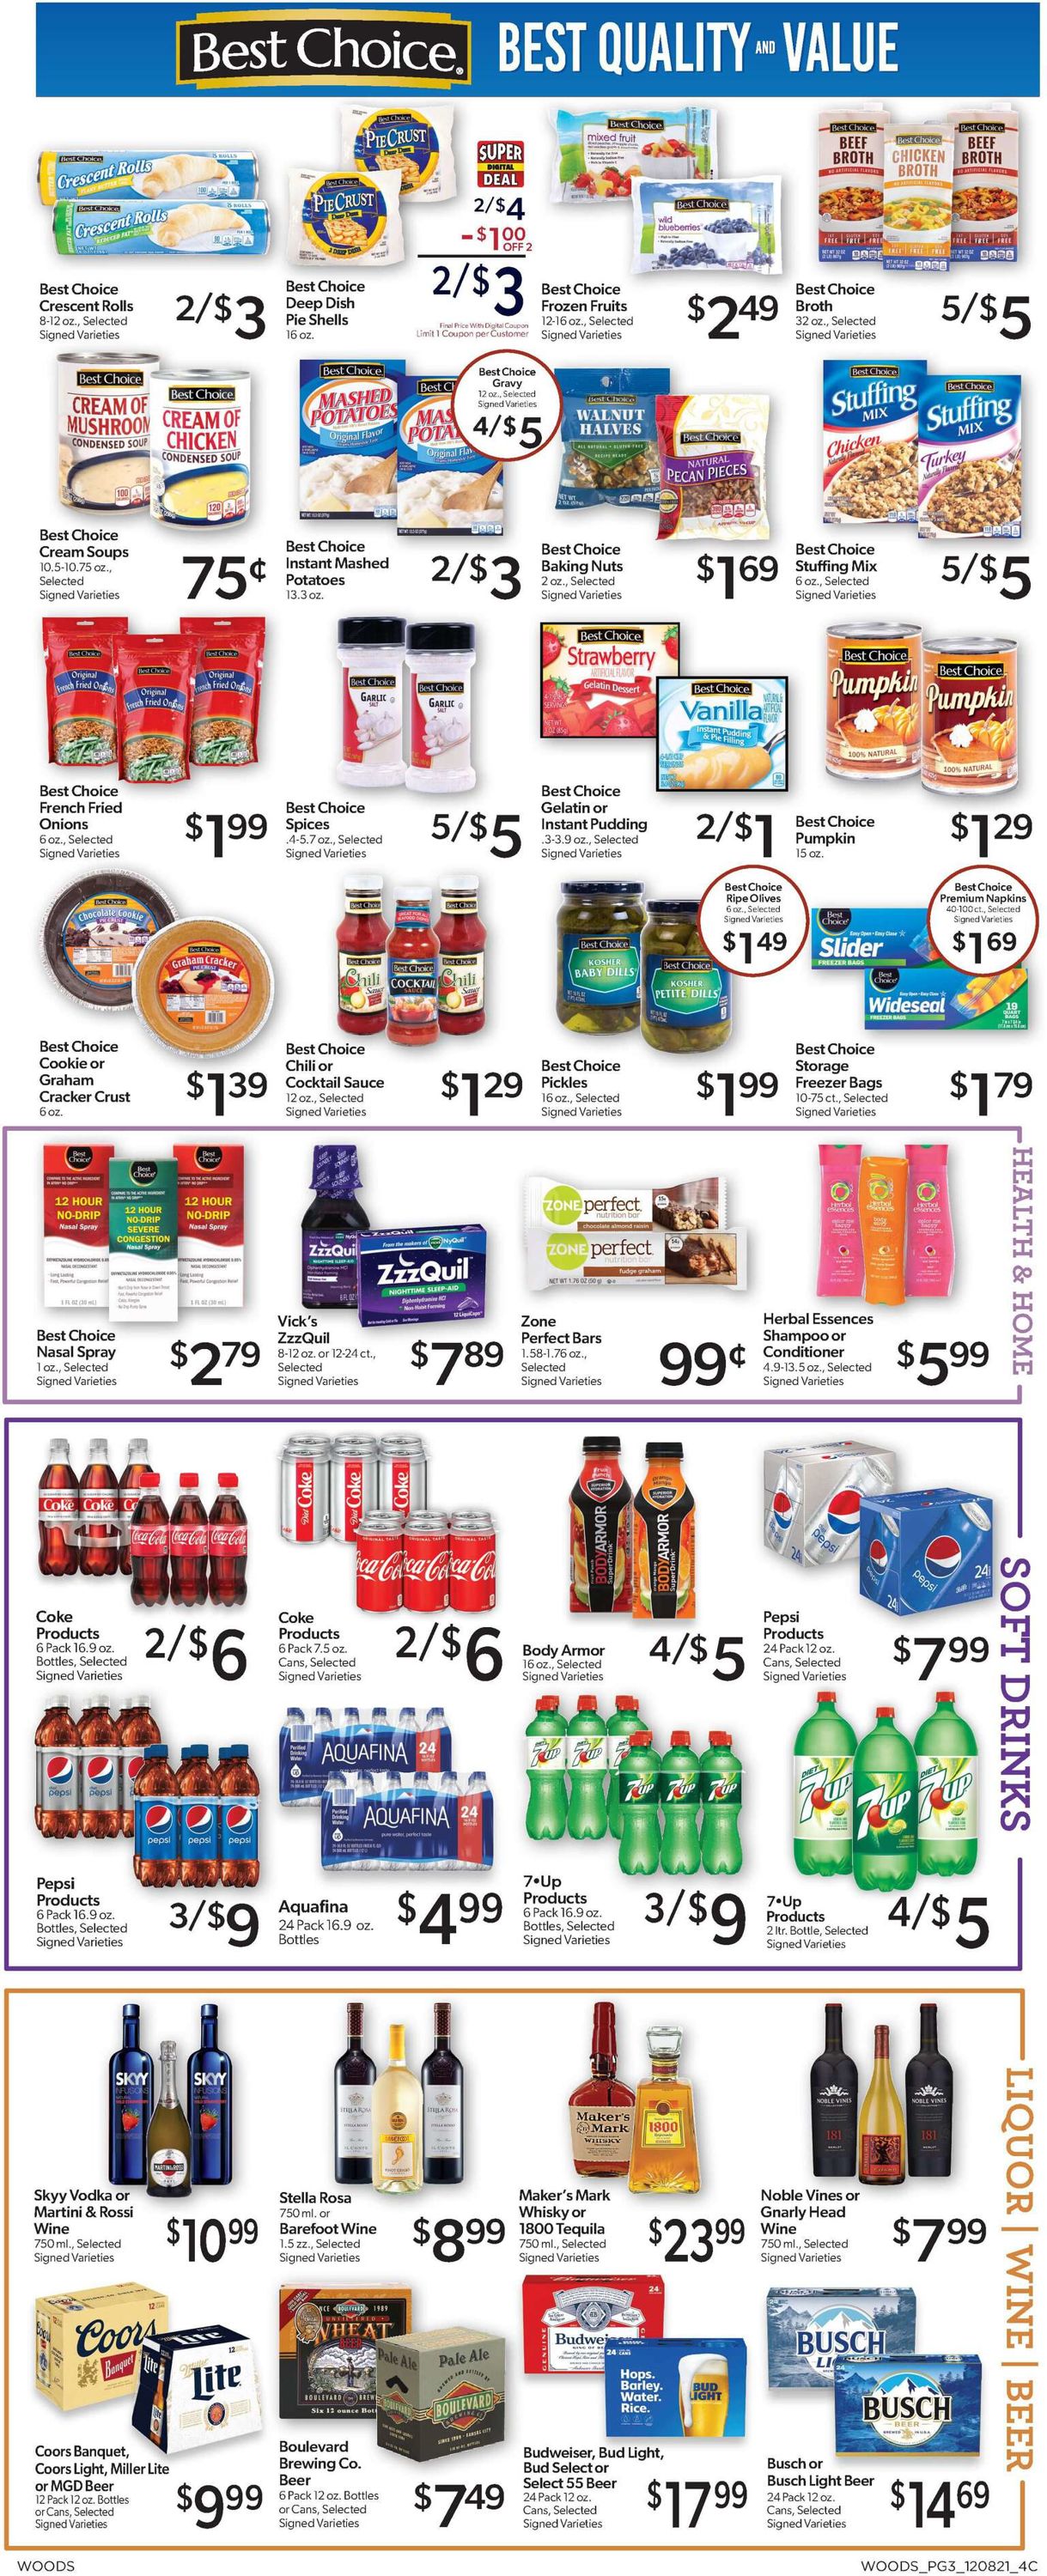 Catalogue Woods Supermarket - HOLIDAY 2021 from 12/08/2021